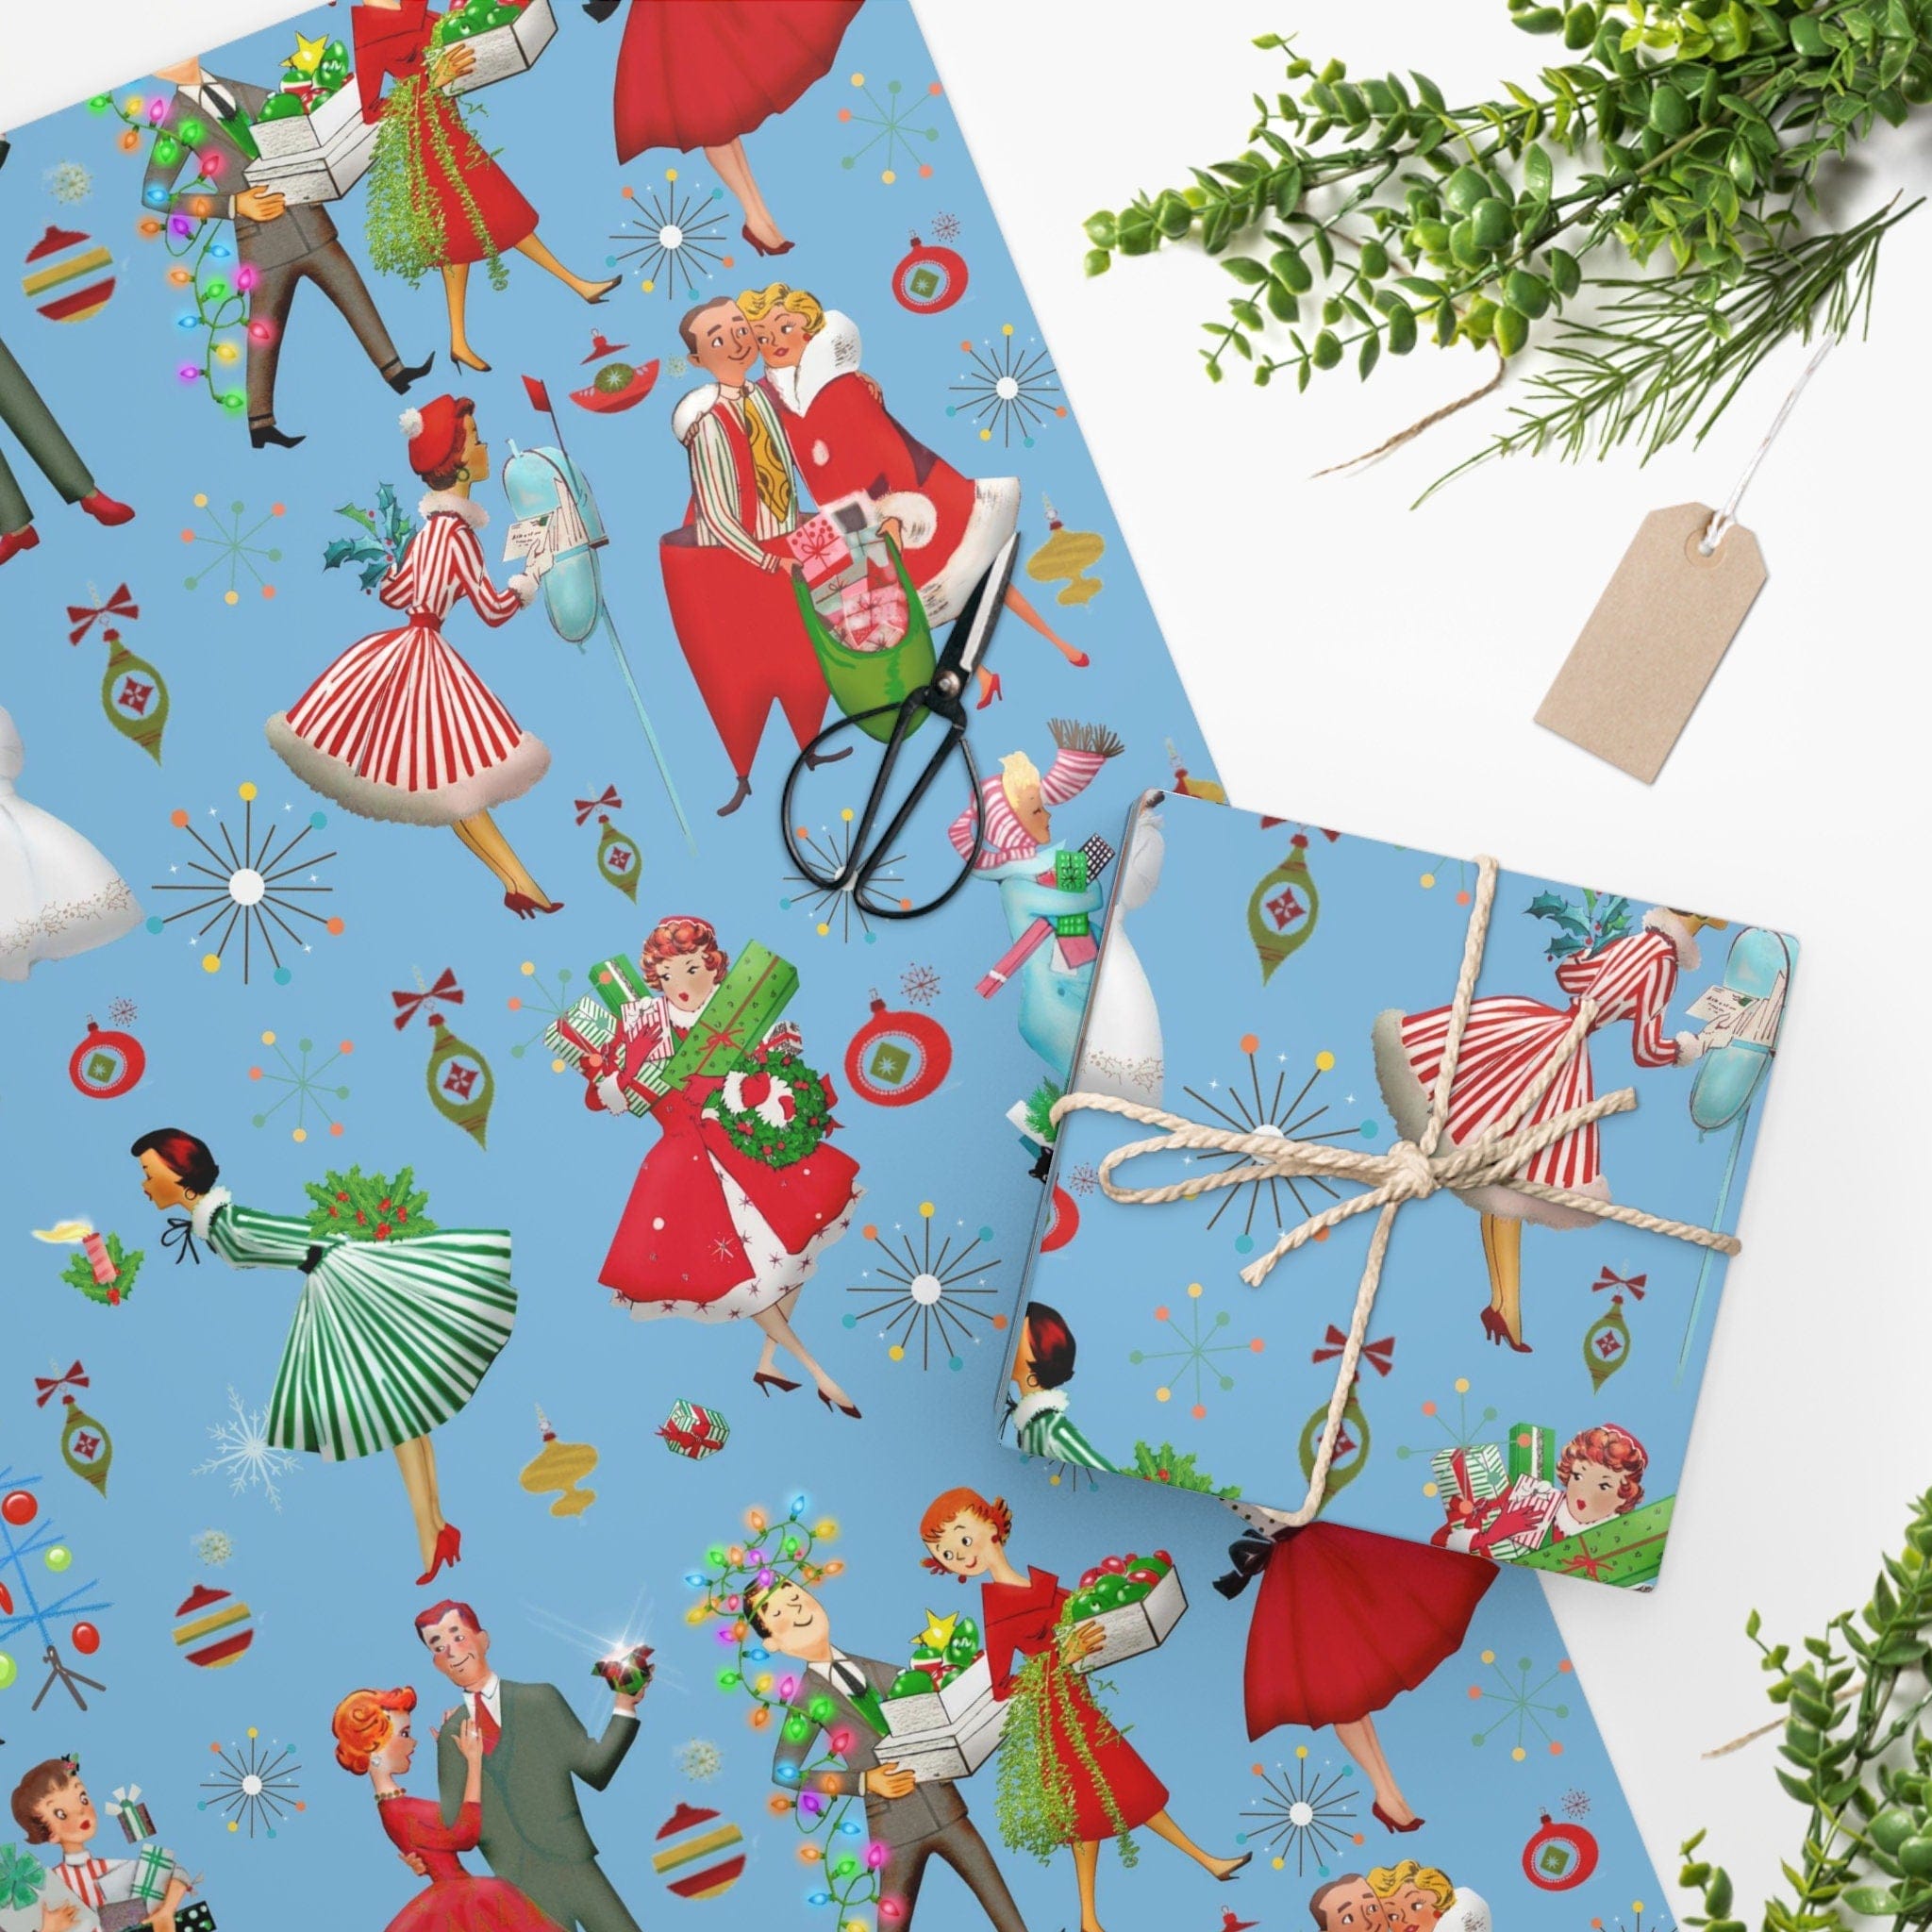 Kate McEnroe New York Retro Vintage 1950s Christmas Wrapping Paper, Mid Century Modern Retro Green, Red, Women, Ladies, Housewives Holiday Gift Wrap Seasonal &amp; Holiday Decorations